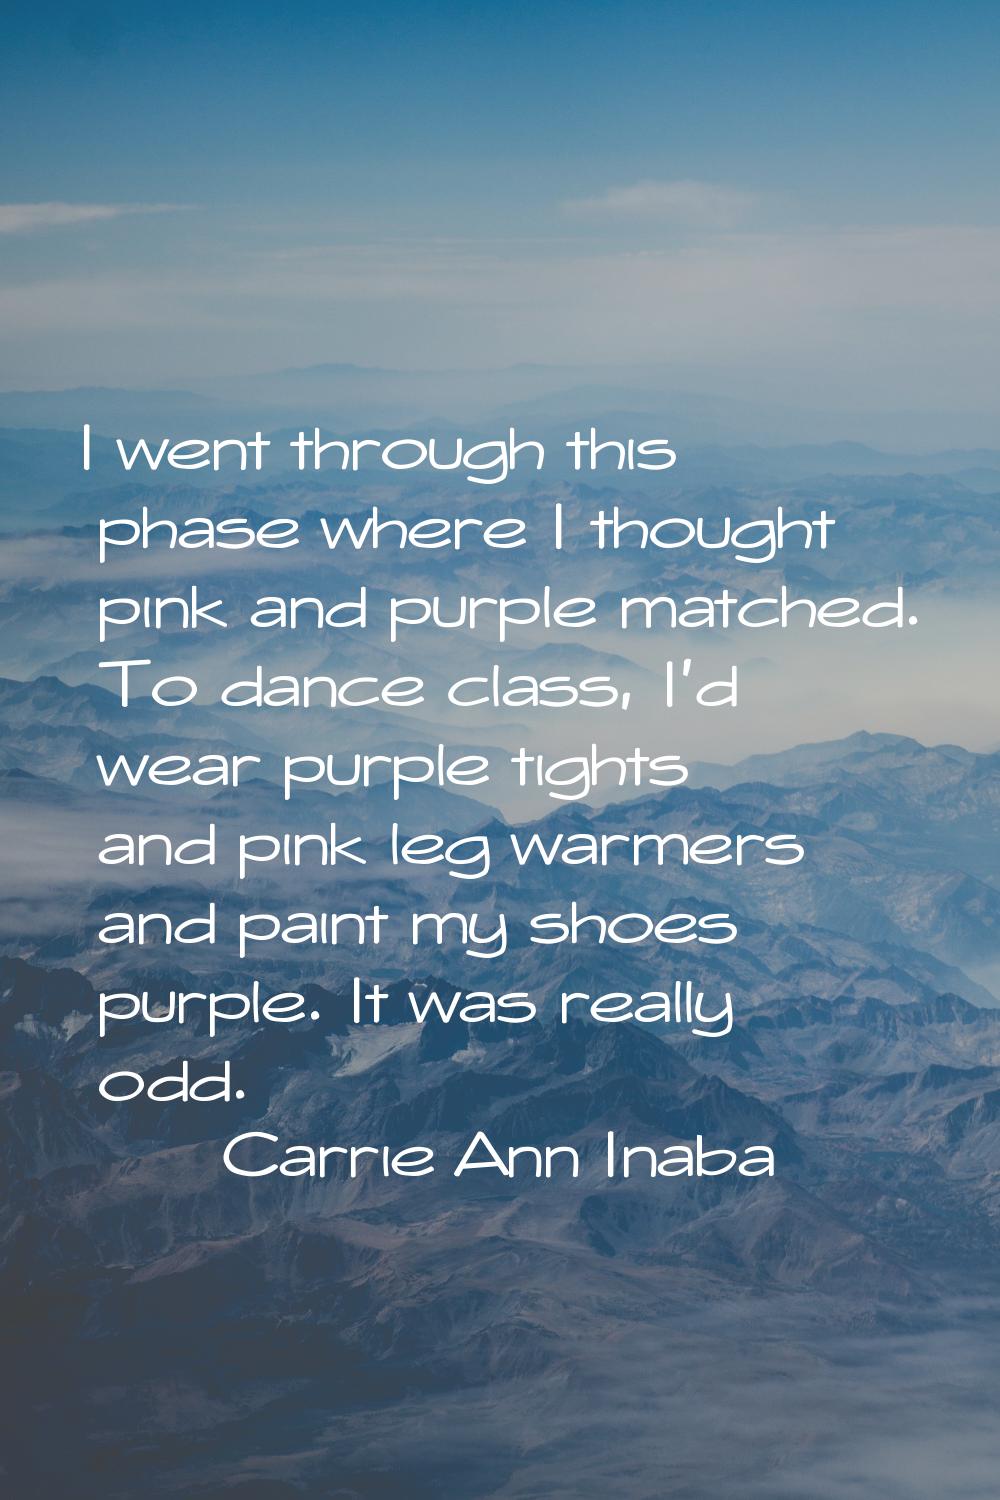 I went through this phase where I thought pink and purple matched. To dance class, I'd wear purple 